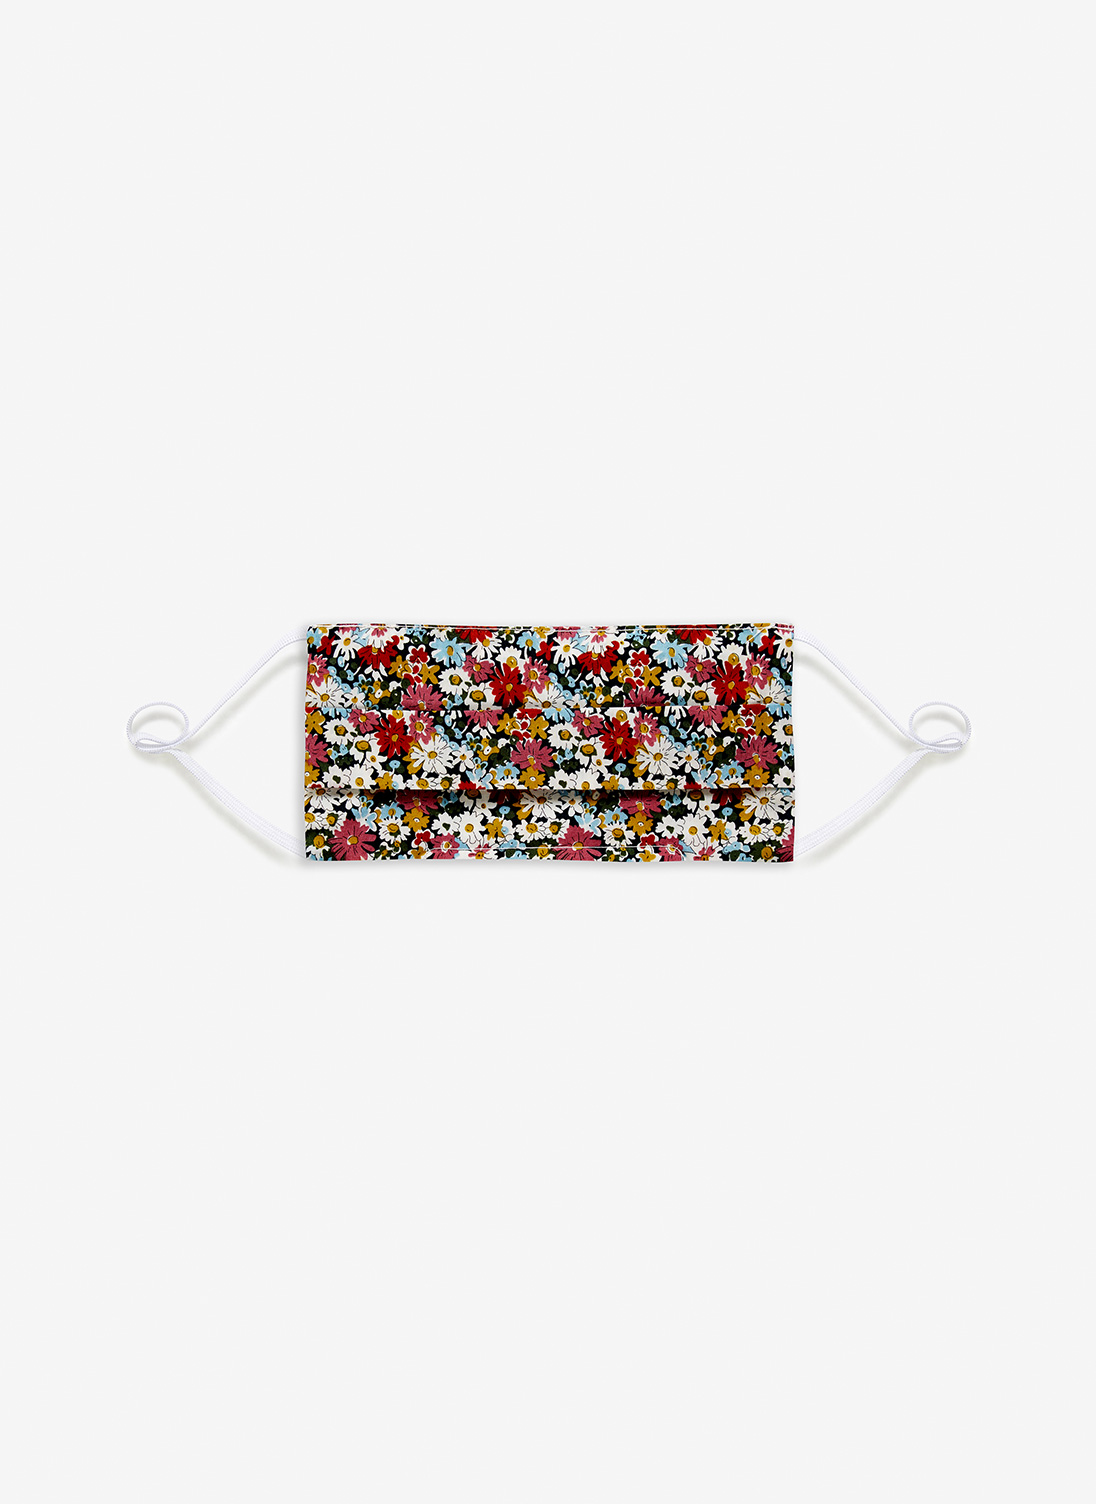 Cotton Face Mask In Liberty Fabric Autumn Meadow